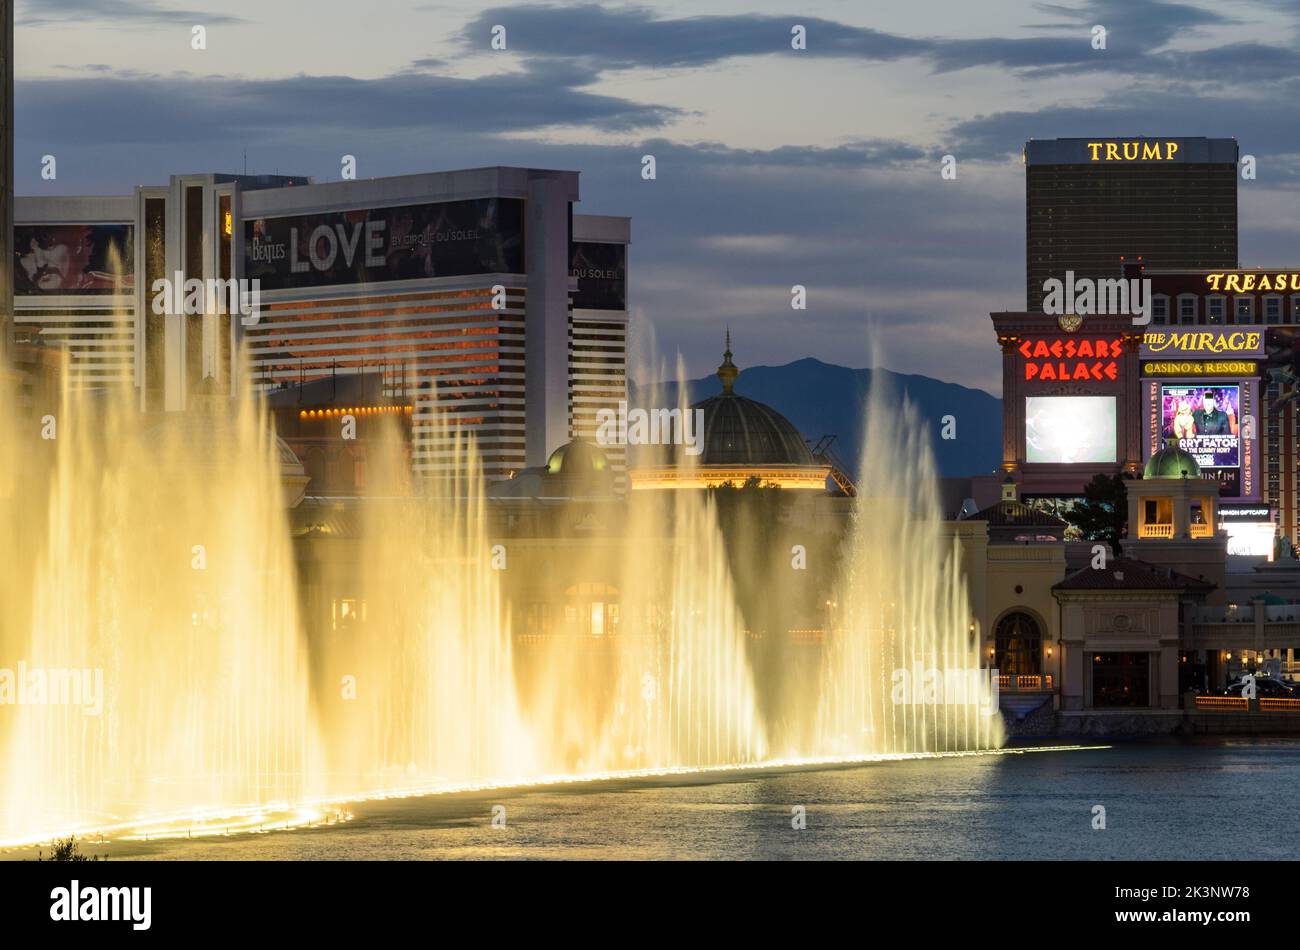 The Bellagio Fountains in front of the Bellagio Casino, with Ceasers Palace and the Las Vegas Strip visible in the background in Las Vegas, Nevada, US Stock Photo